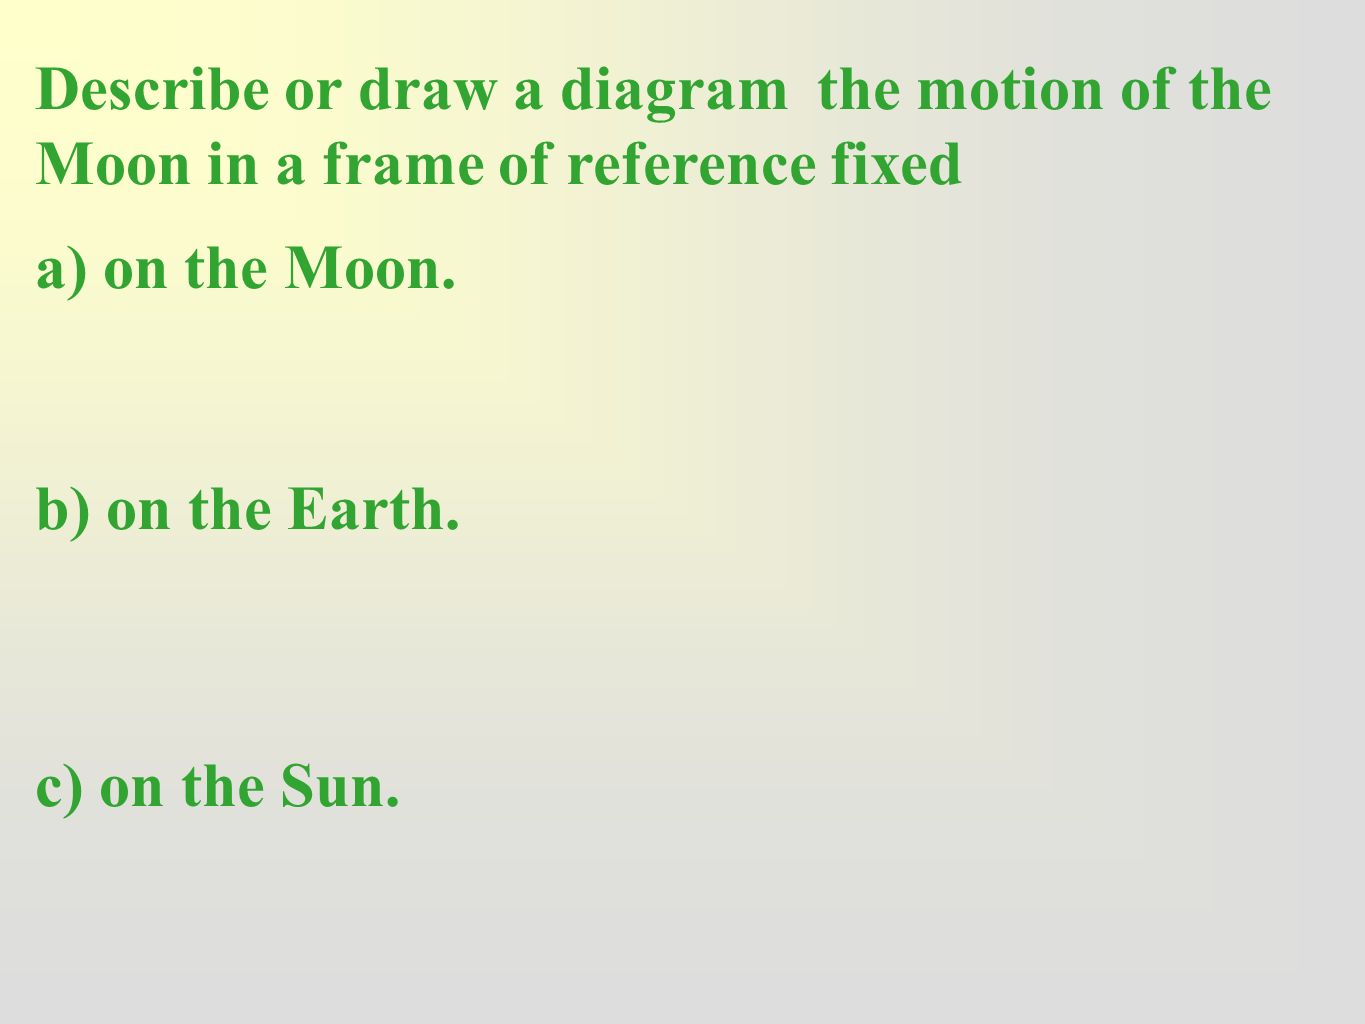 Describe or draw a diagram the motion of the Moon in a frame of reference fixed a) on the Moon.